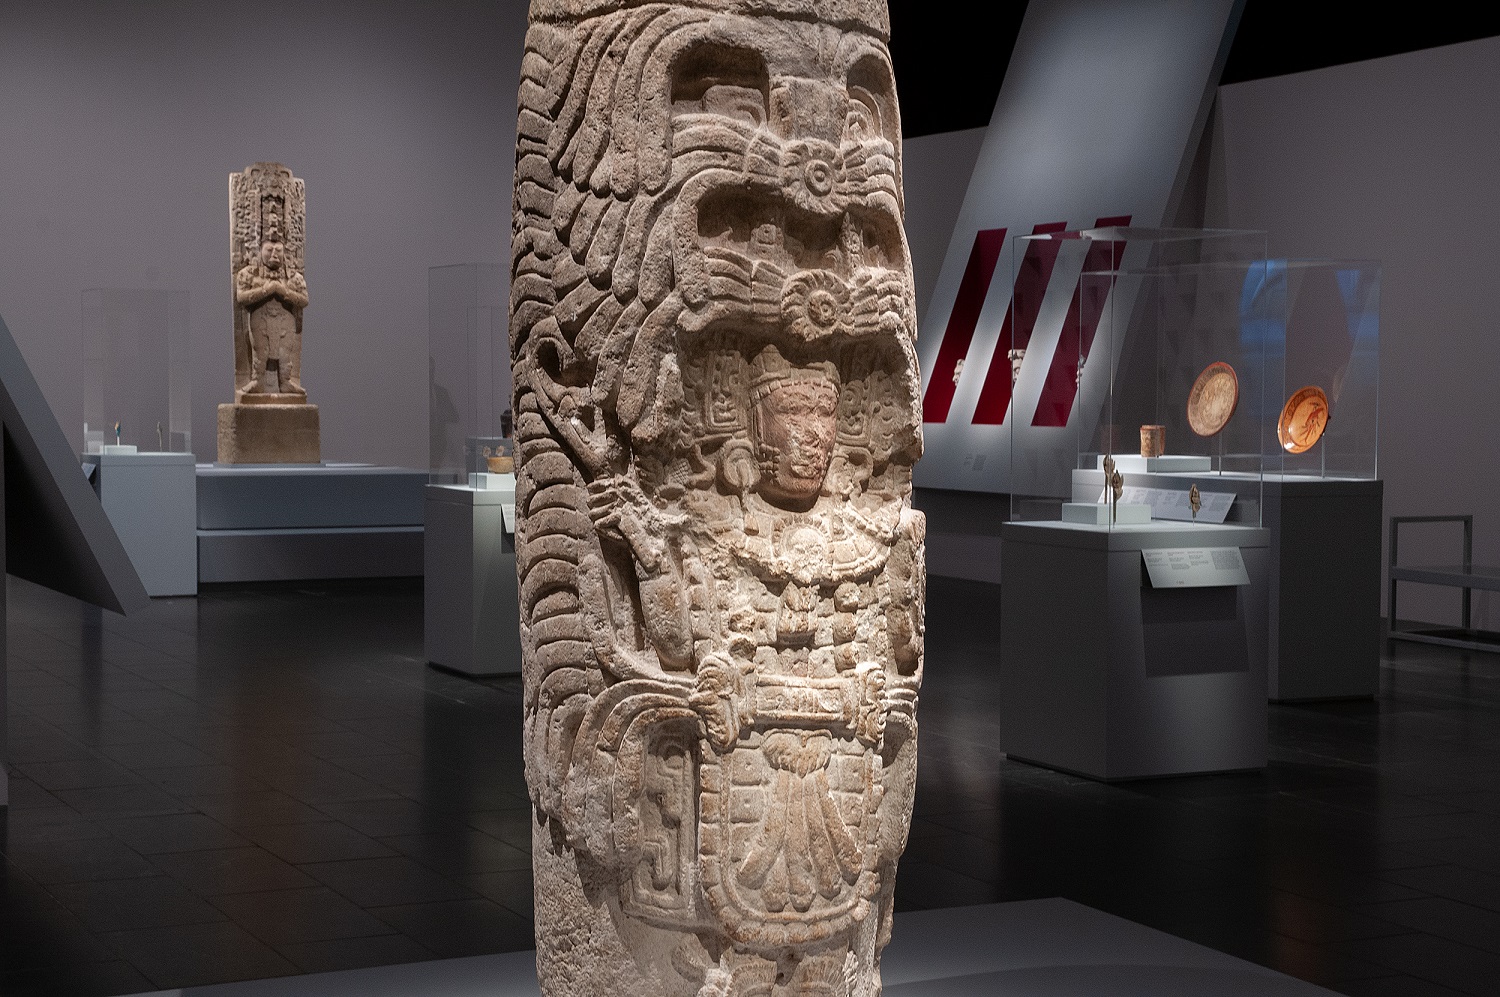 Lives of the Gods – Divinity in Maya Art